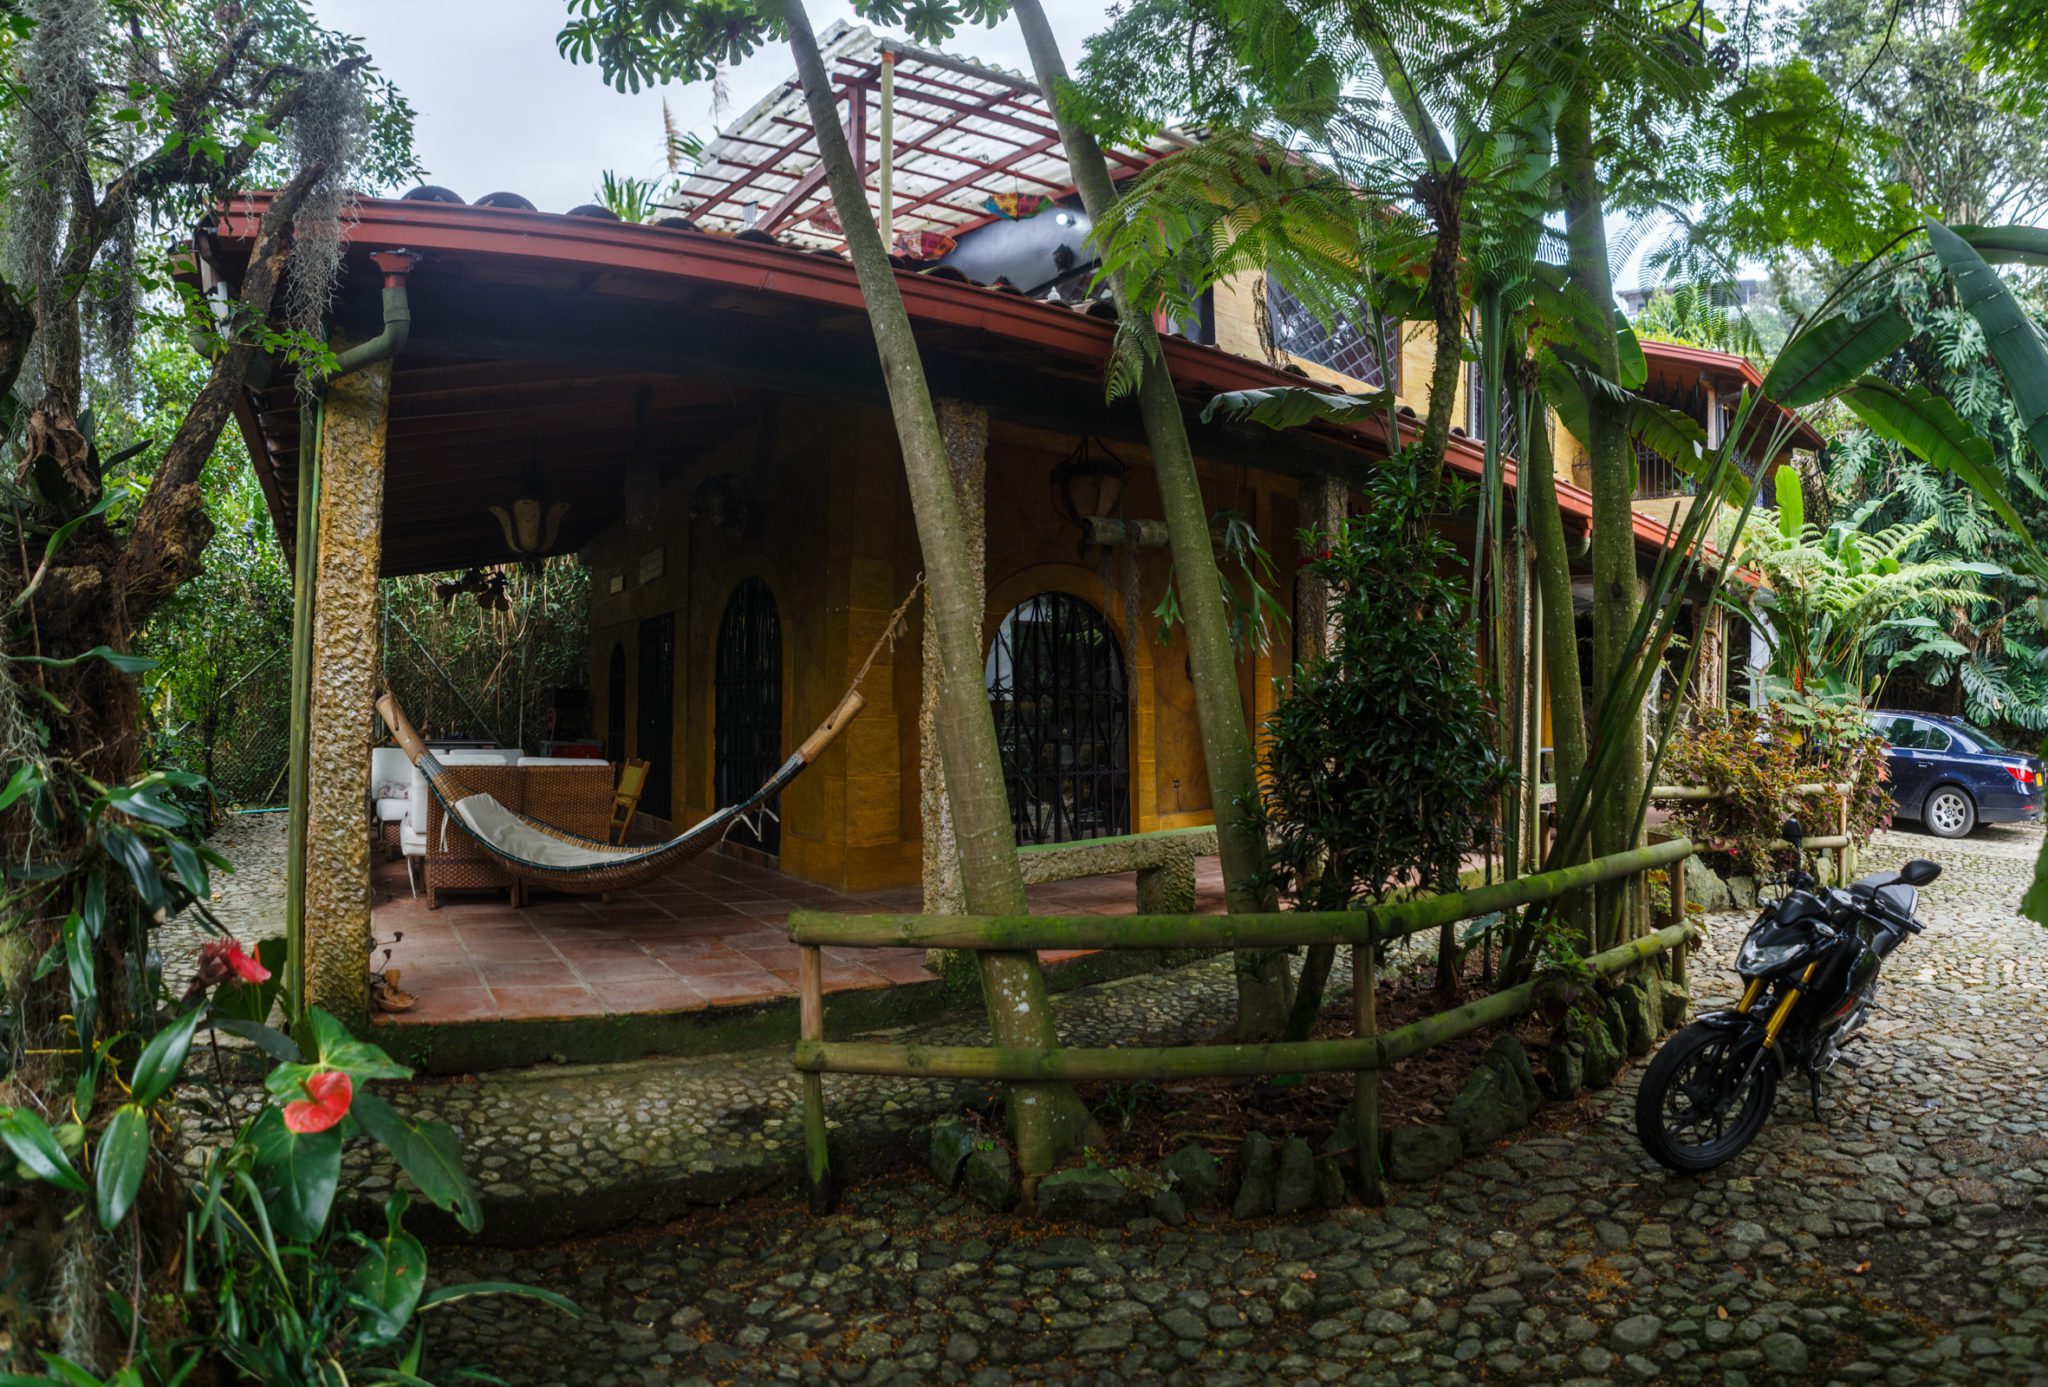 Affordable Bali Style Eco Lodge Minutes From Medellin In Natural Lush Setting